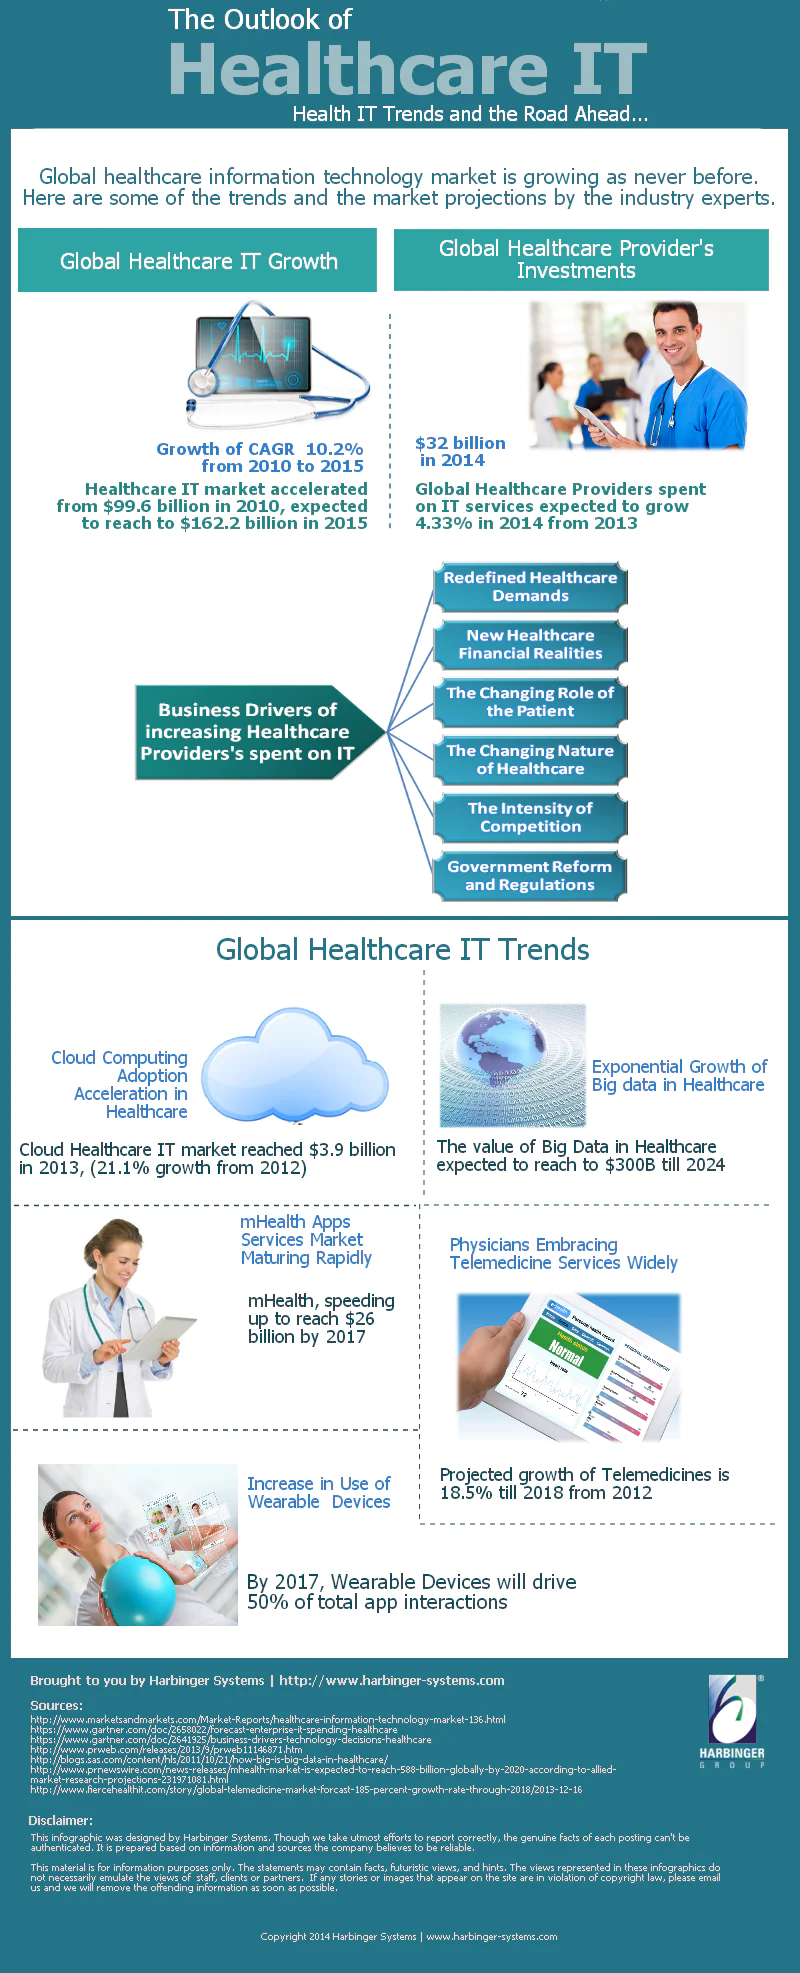 Information technology has gained prominent role as a solution to improve healthcare services in various parameters. Software technology tools have been widely accepted by various segments making the healthcare delivery low cost and available in less time. The healthcare IT landscape is evolving and the market is on an upswing for sure. We present you an infographic on what are the trends and future of Healthcare IT Industry.